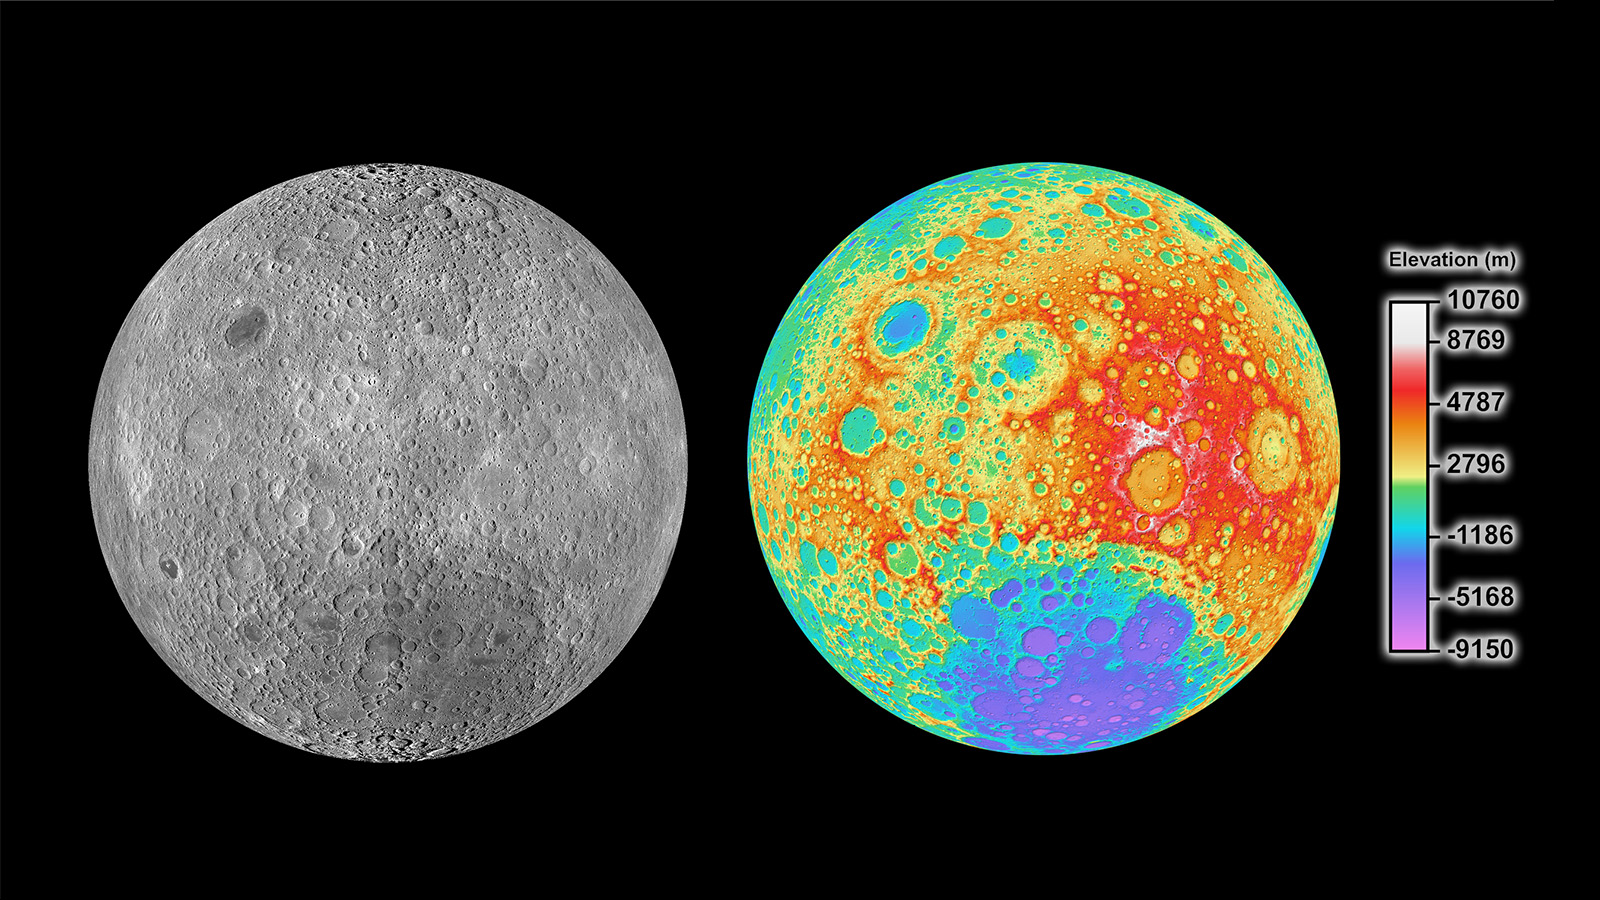 Two side-by-side views of the farside of the Moon. Extensive cratering can be seen in the monochrome view on the left, but it's only upon seeing the topographic overlay on the right that one can get a sense for the large differences in topography.